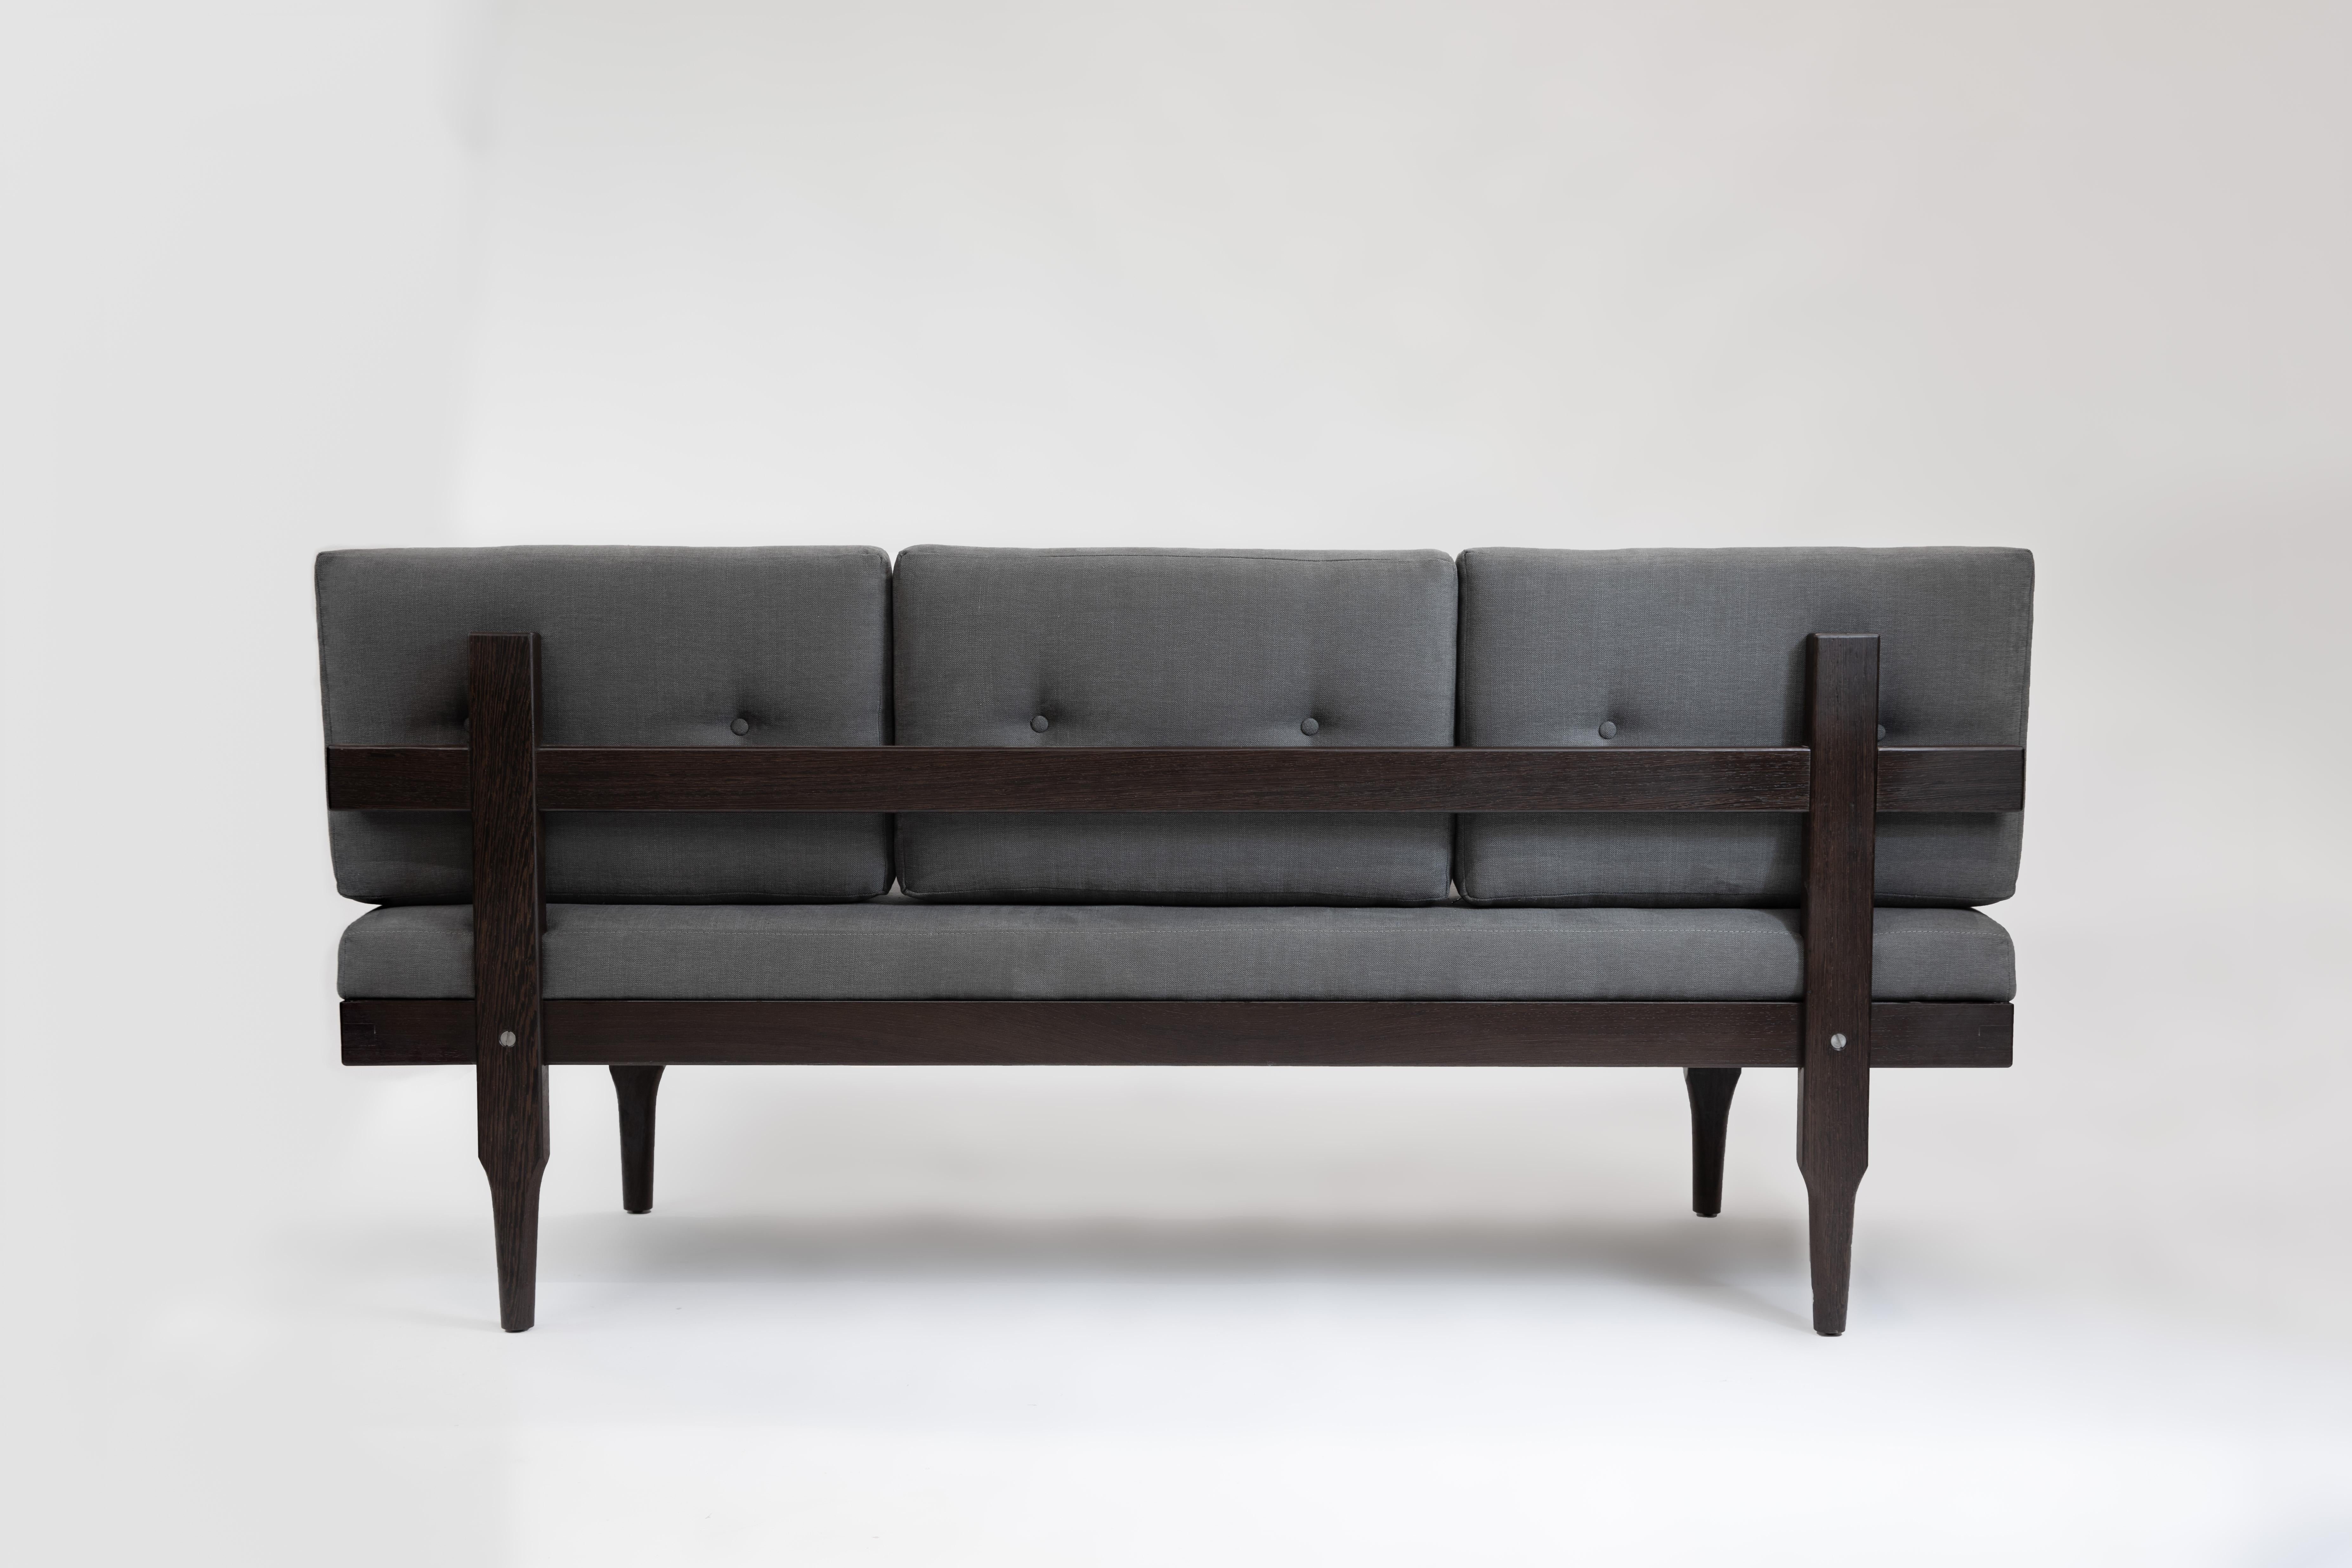 A classy daybed for the minimalists. Wenge, a timber found in Africa if one of the prettiest timber species around. We have matched it with a grey fabric from Panaz and have given it some small stainless details to catch the eye.